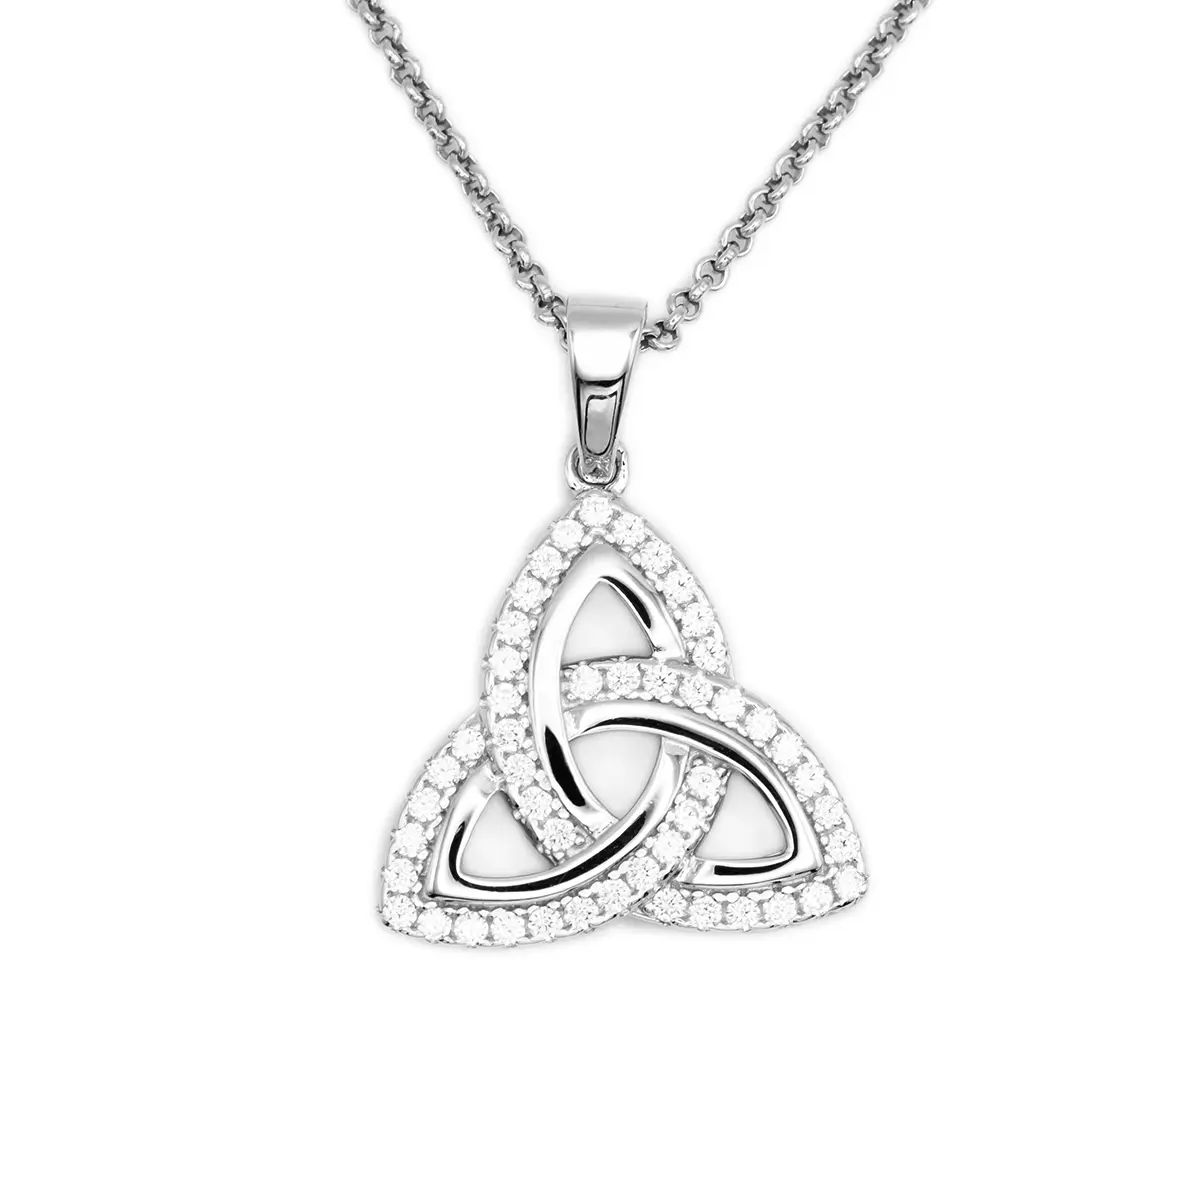 Sterling Silver Trinity Knot Pendant Inlaid With Cubic Zirconia Gemstones 8...